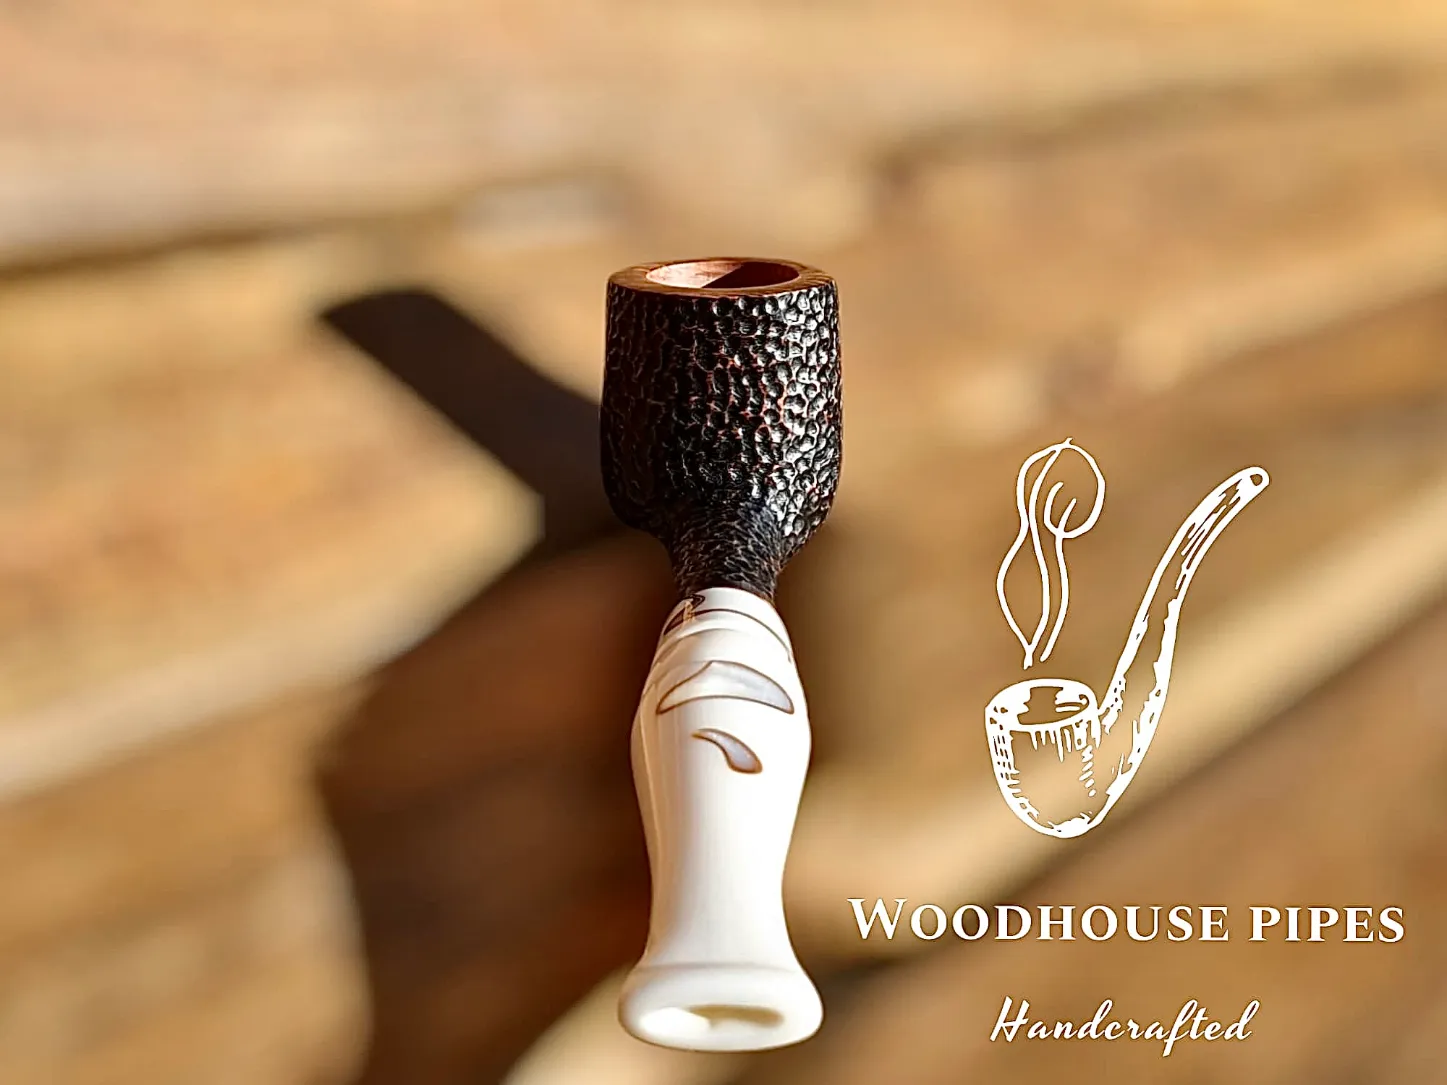 Handmade Tobacco Pipe - WOODHOUSE PIPES Handcrafted - Photo Number 0440